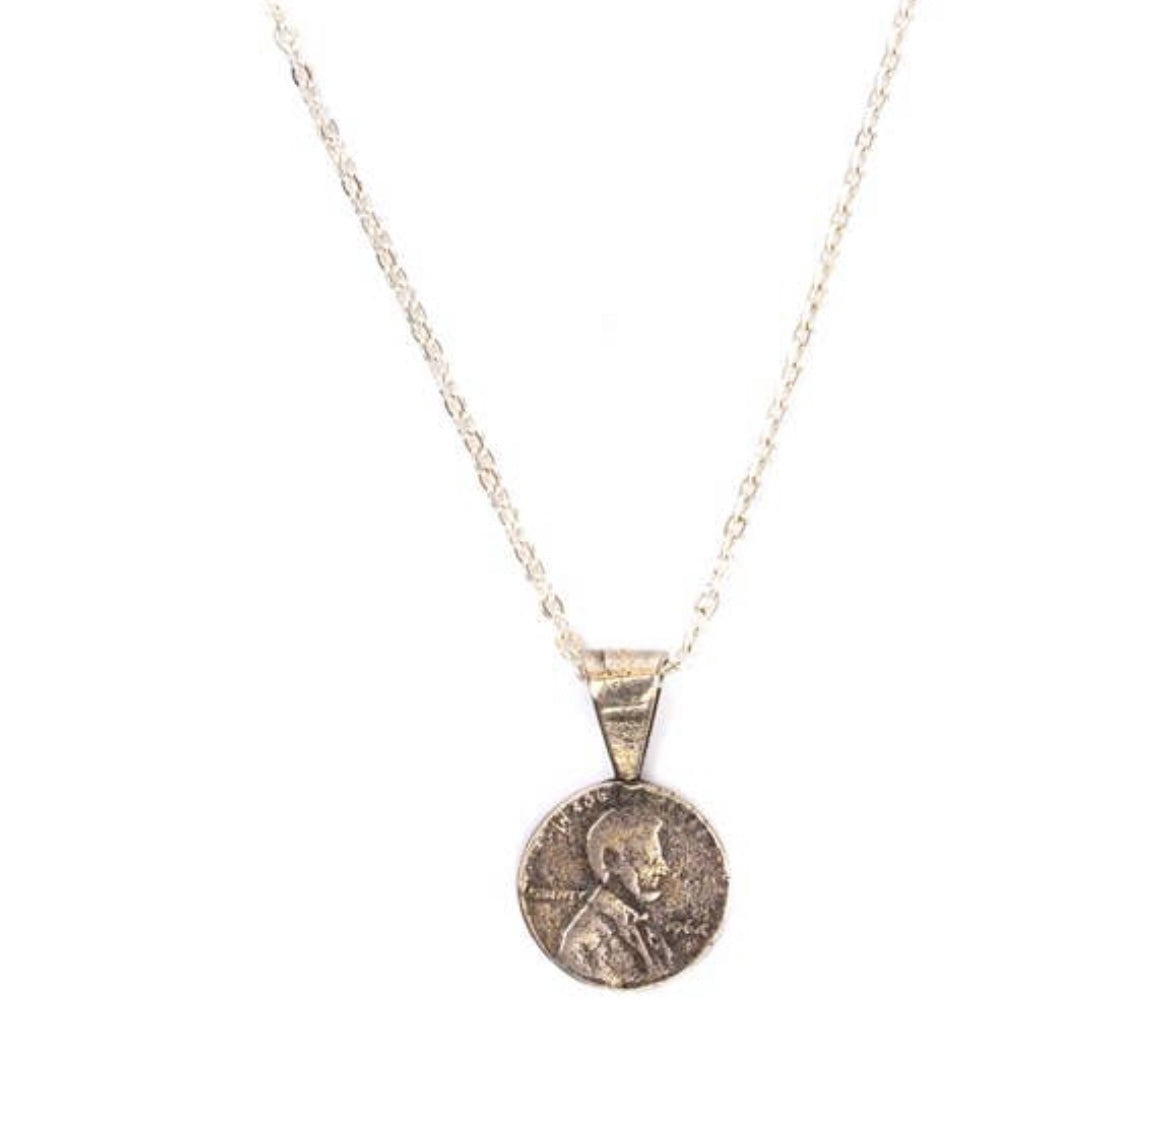 Penny From Heaven Petite Penny Necklace - Yellow Bronze